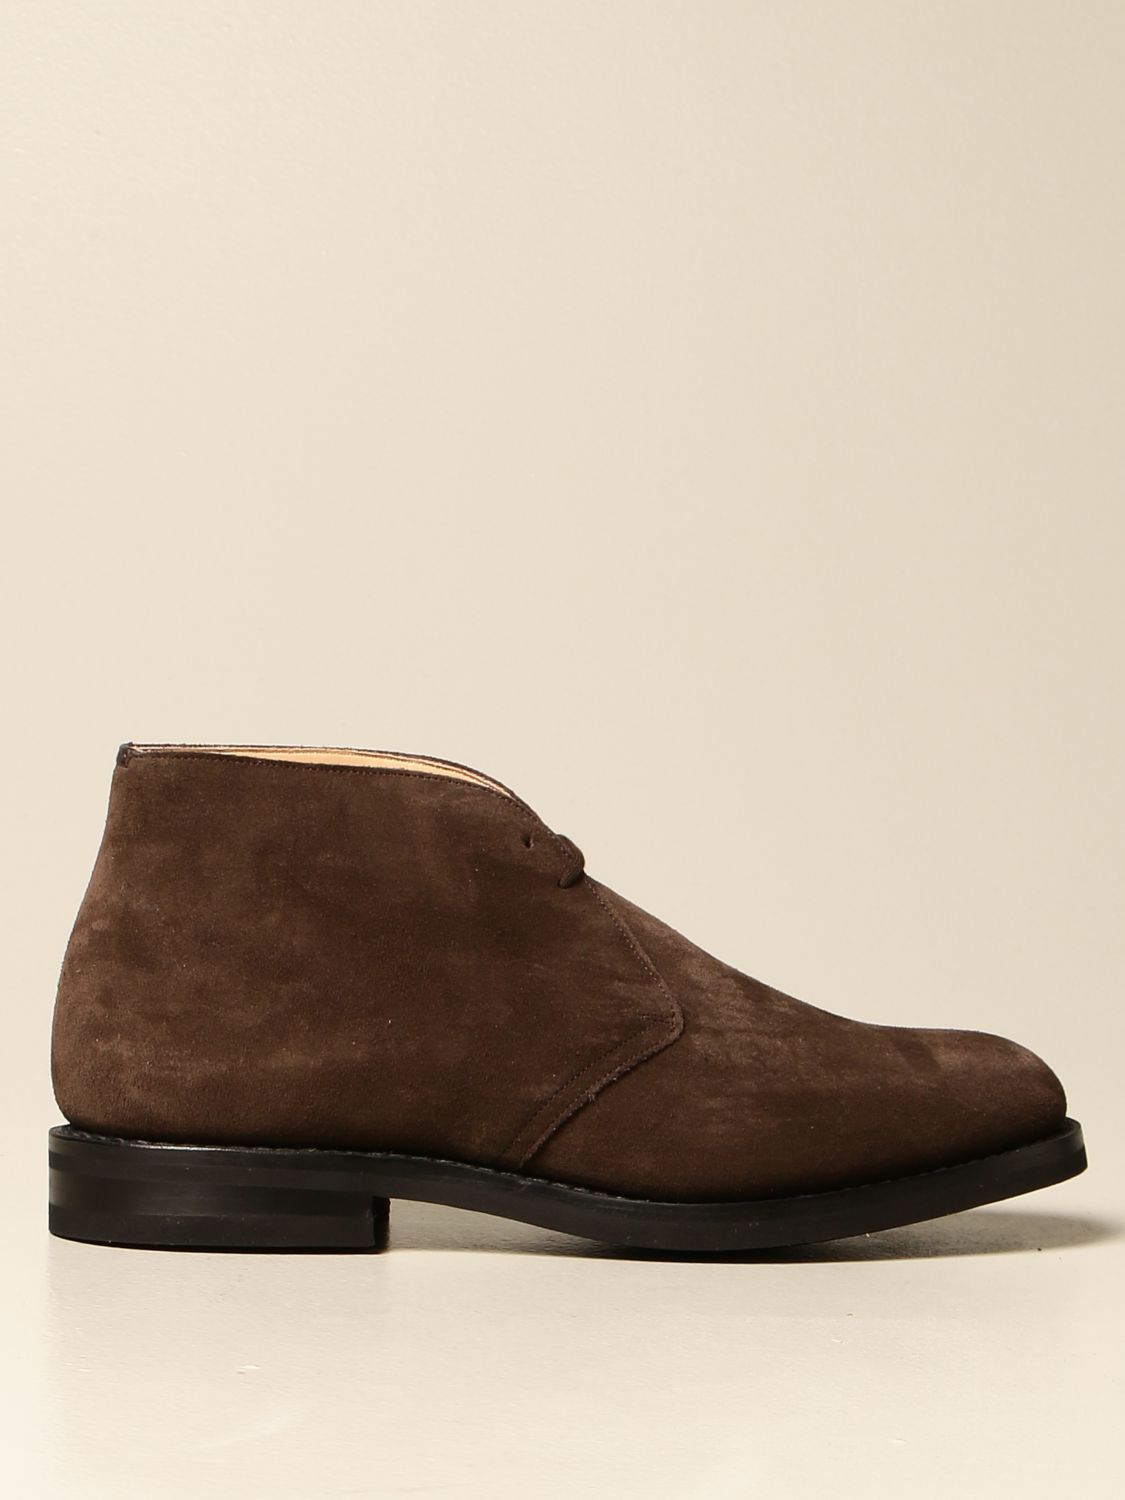 Buy > ryder ankle boot > in stock